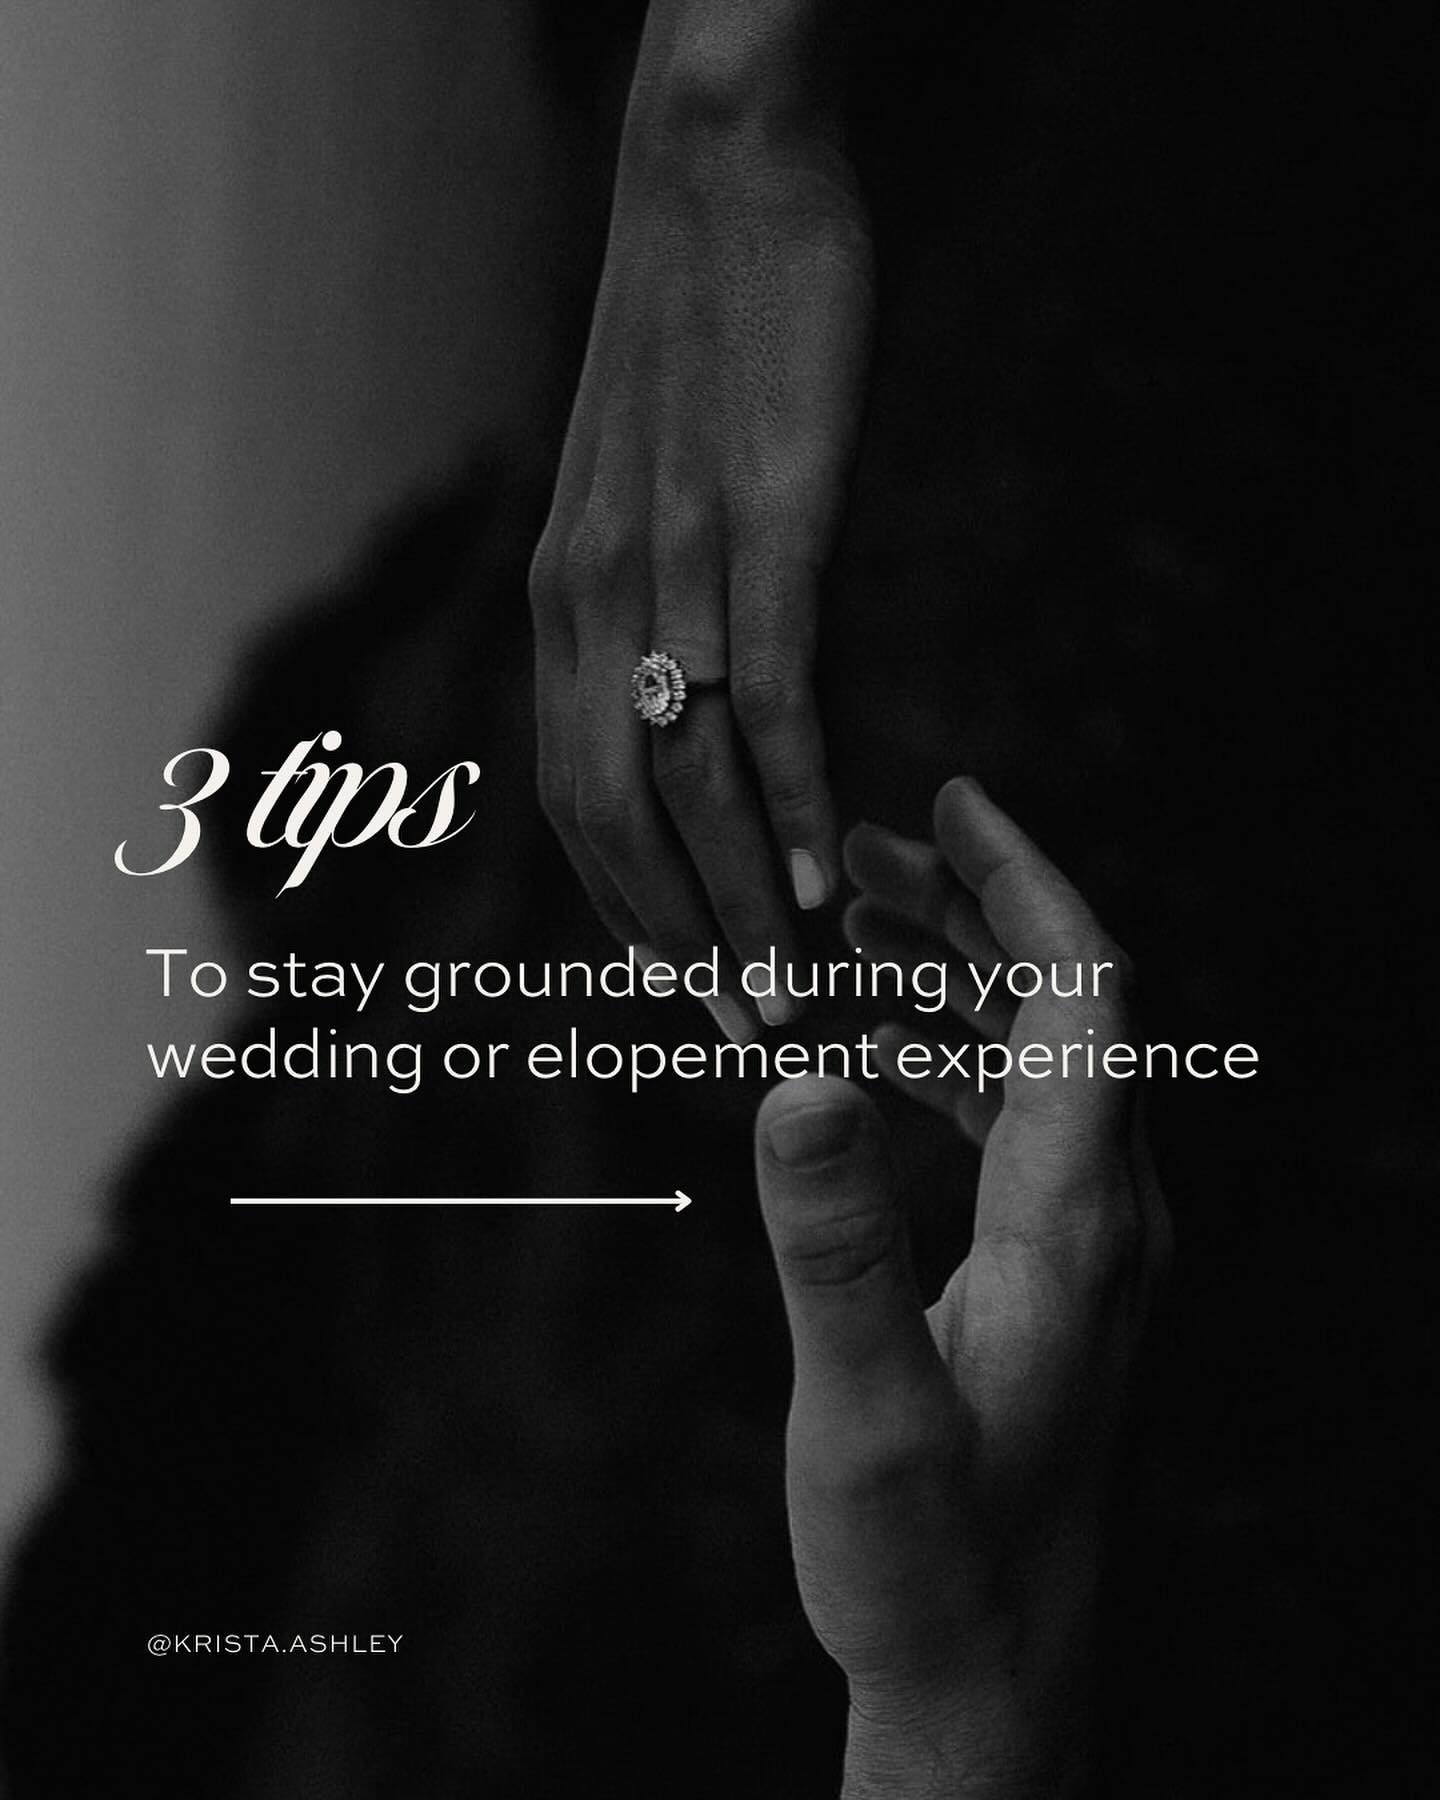 Prioritizing your presence on your wedding day might be just be my most important advice.

When you&rsquo;re fully present &amp; grounded, your experience deepens &amp; so does the memory of the day once it&rsquo;s over.

A mindful approach will also